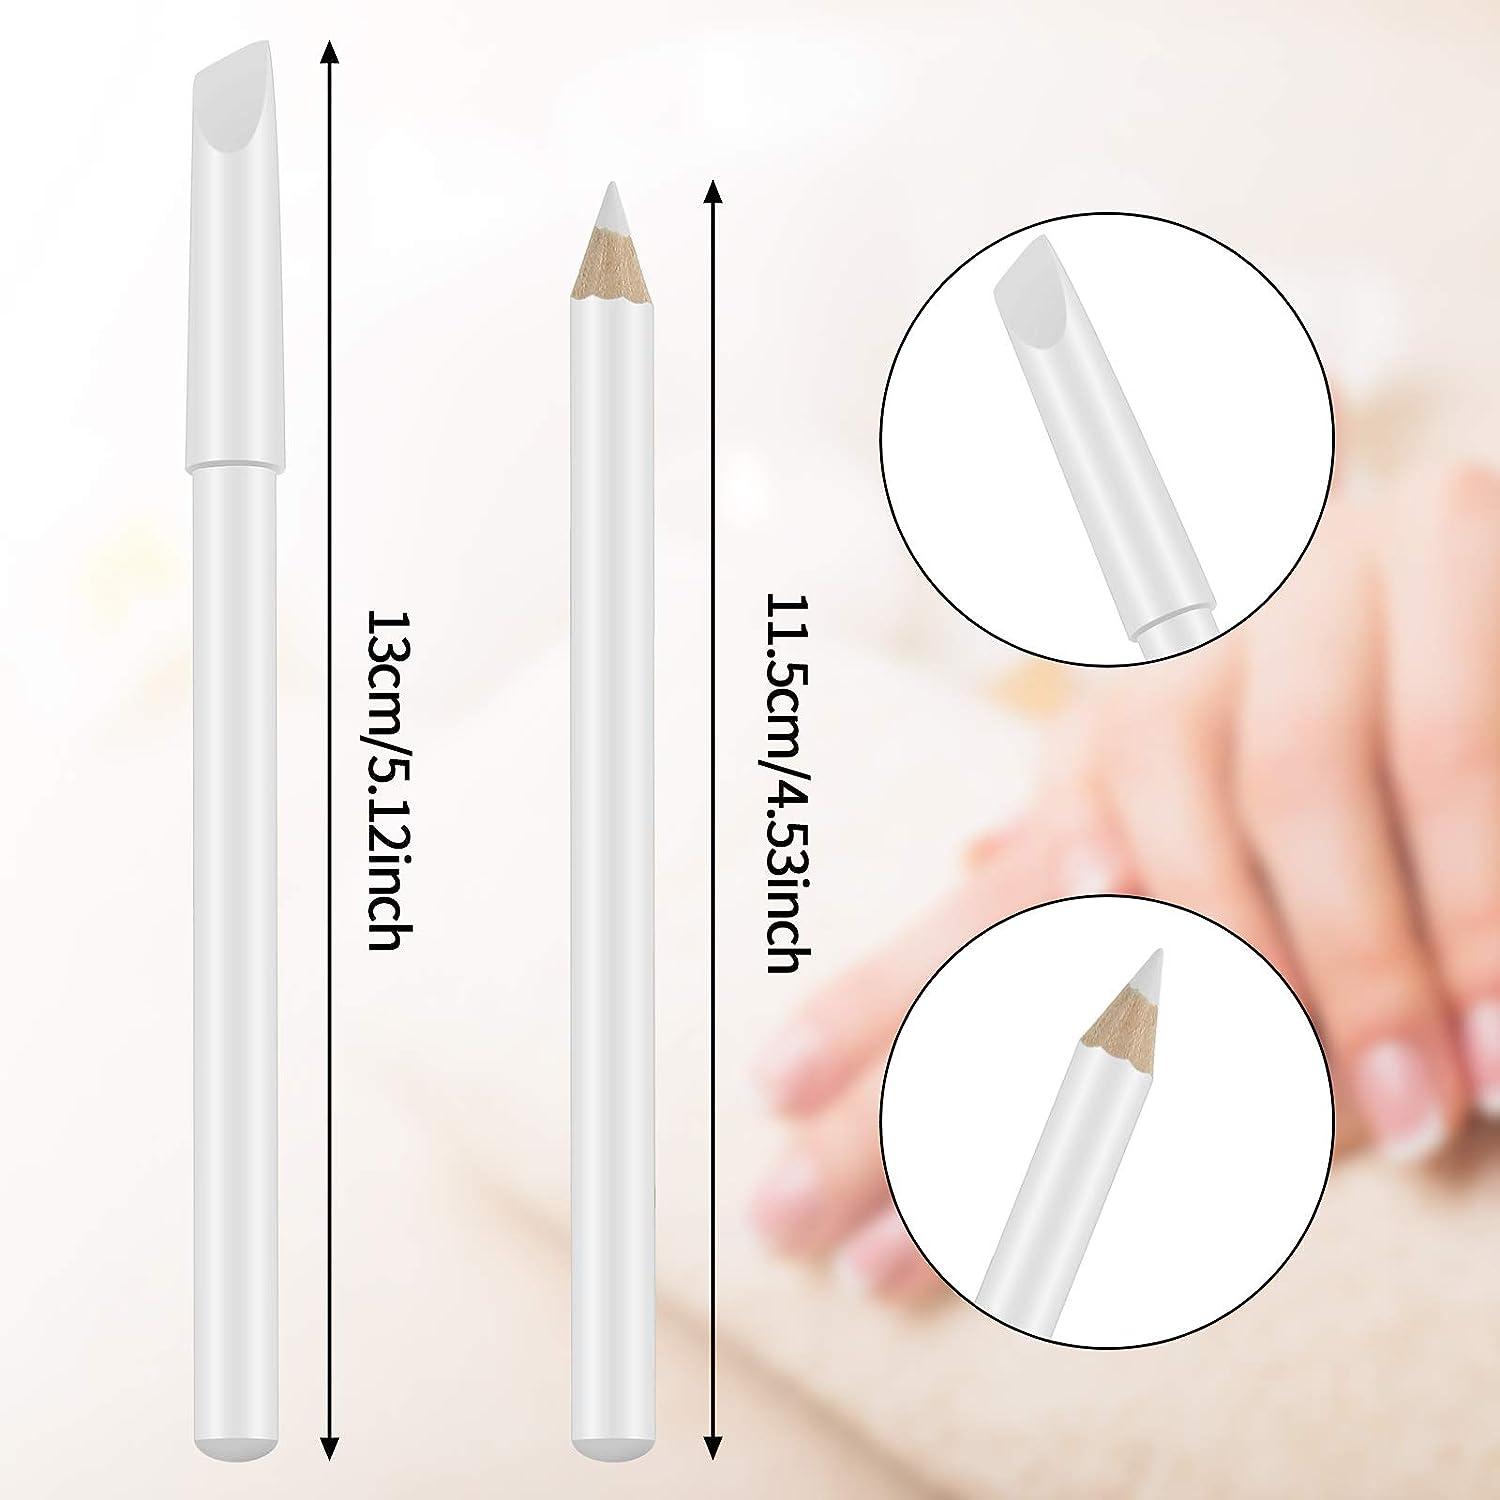 Nail Whitening Pencil 2-in-1 White Nail Pencil DIY Nail Design Manicure  with Cuticle Pusher